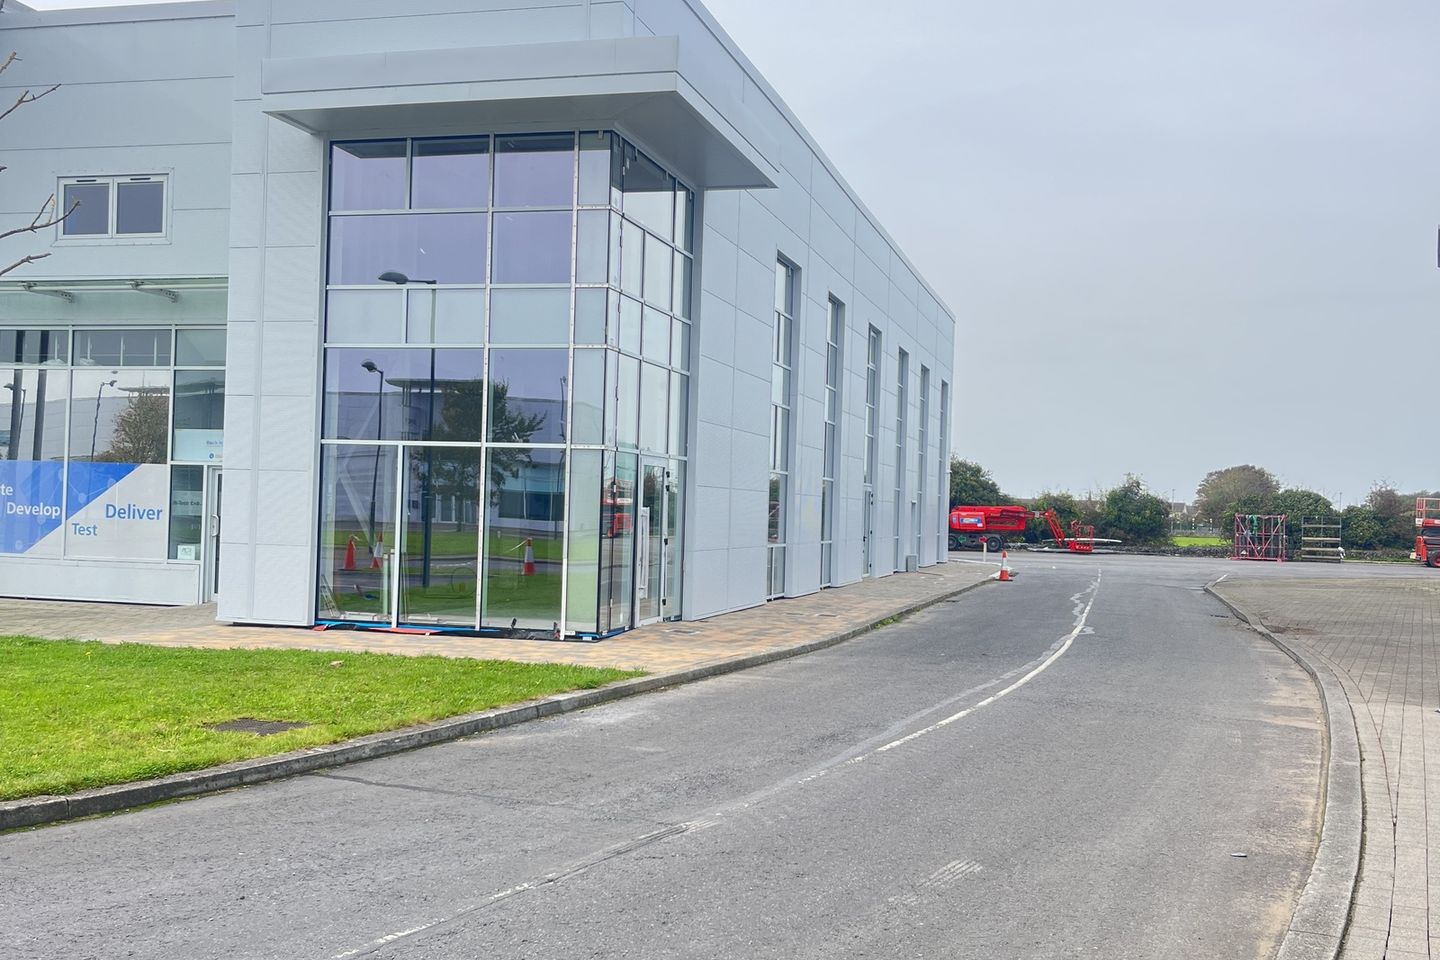 18 Claregalway Corporate Park, Claregalway, Co. Galway